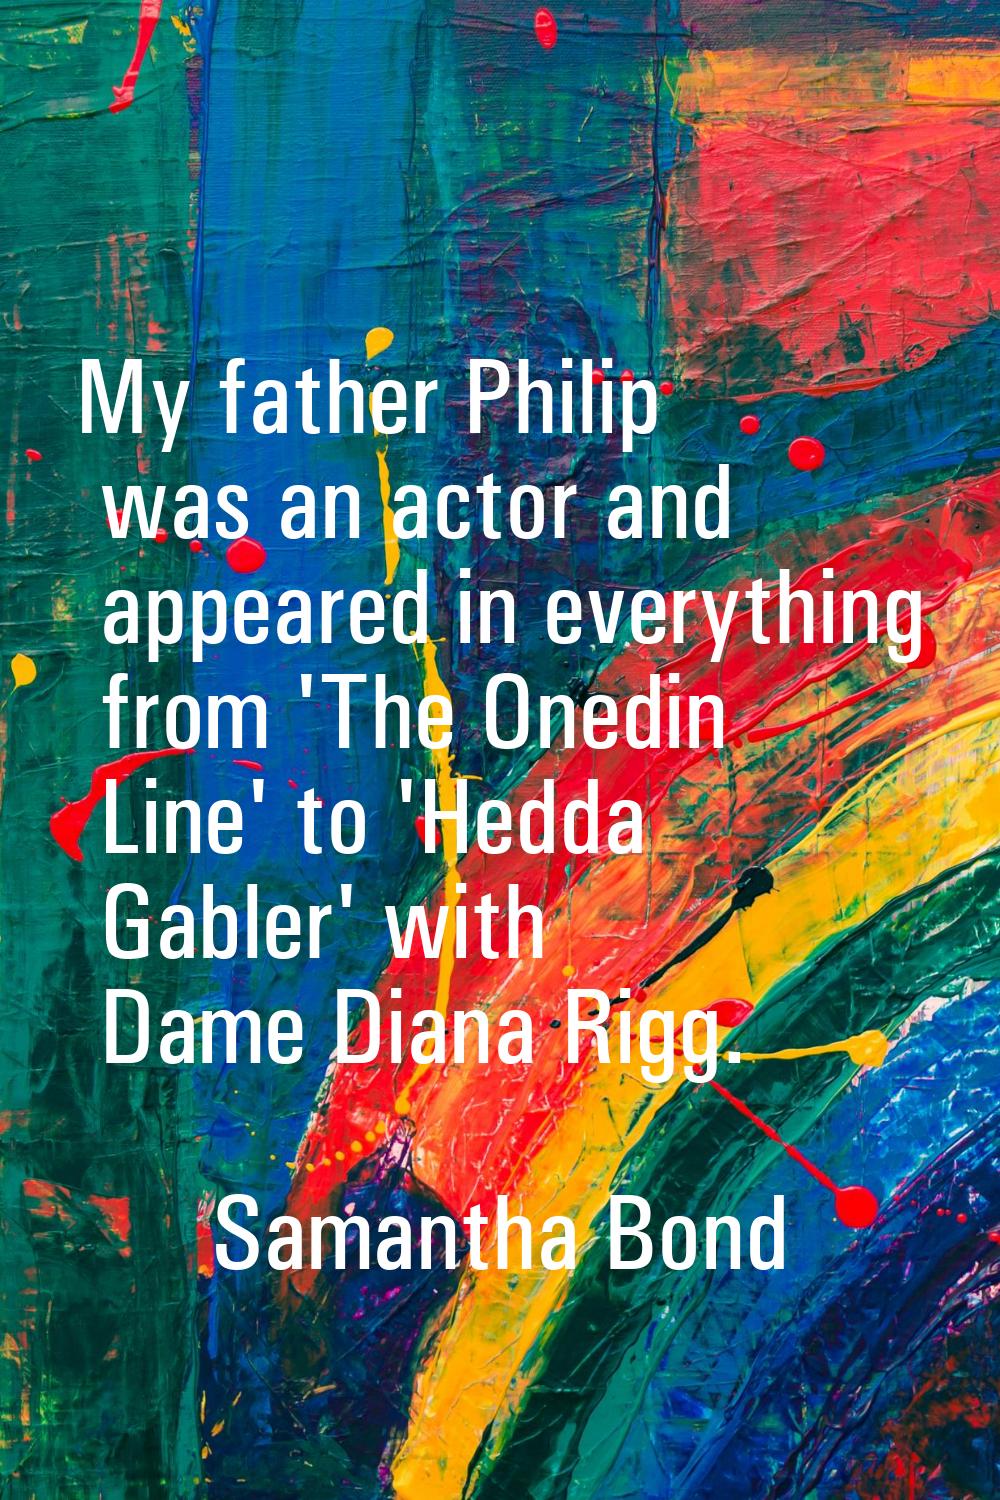 My father Philip was an actor and appeared in everything from 'The Onedin Line' to 'Hedda Gabler' w